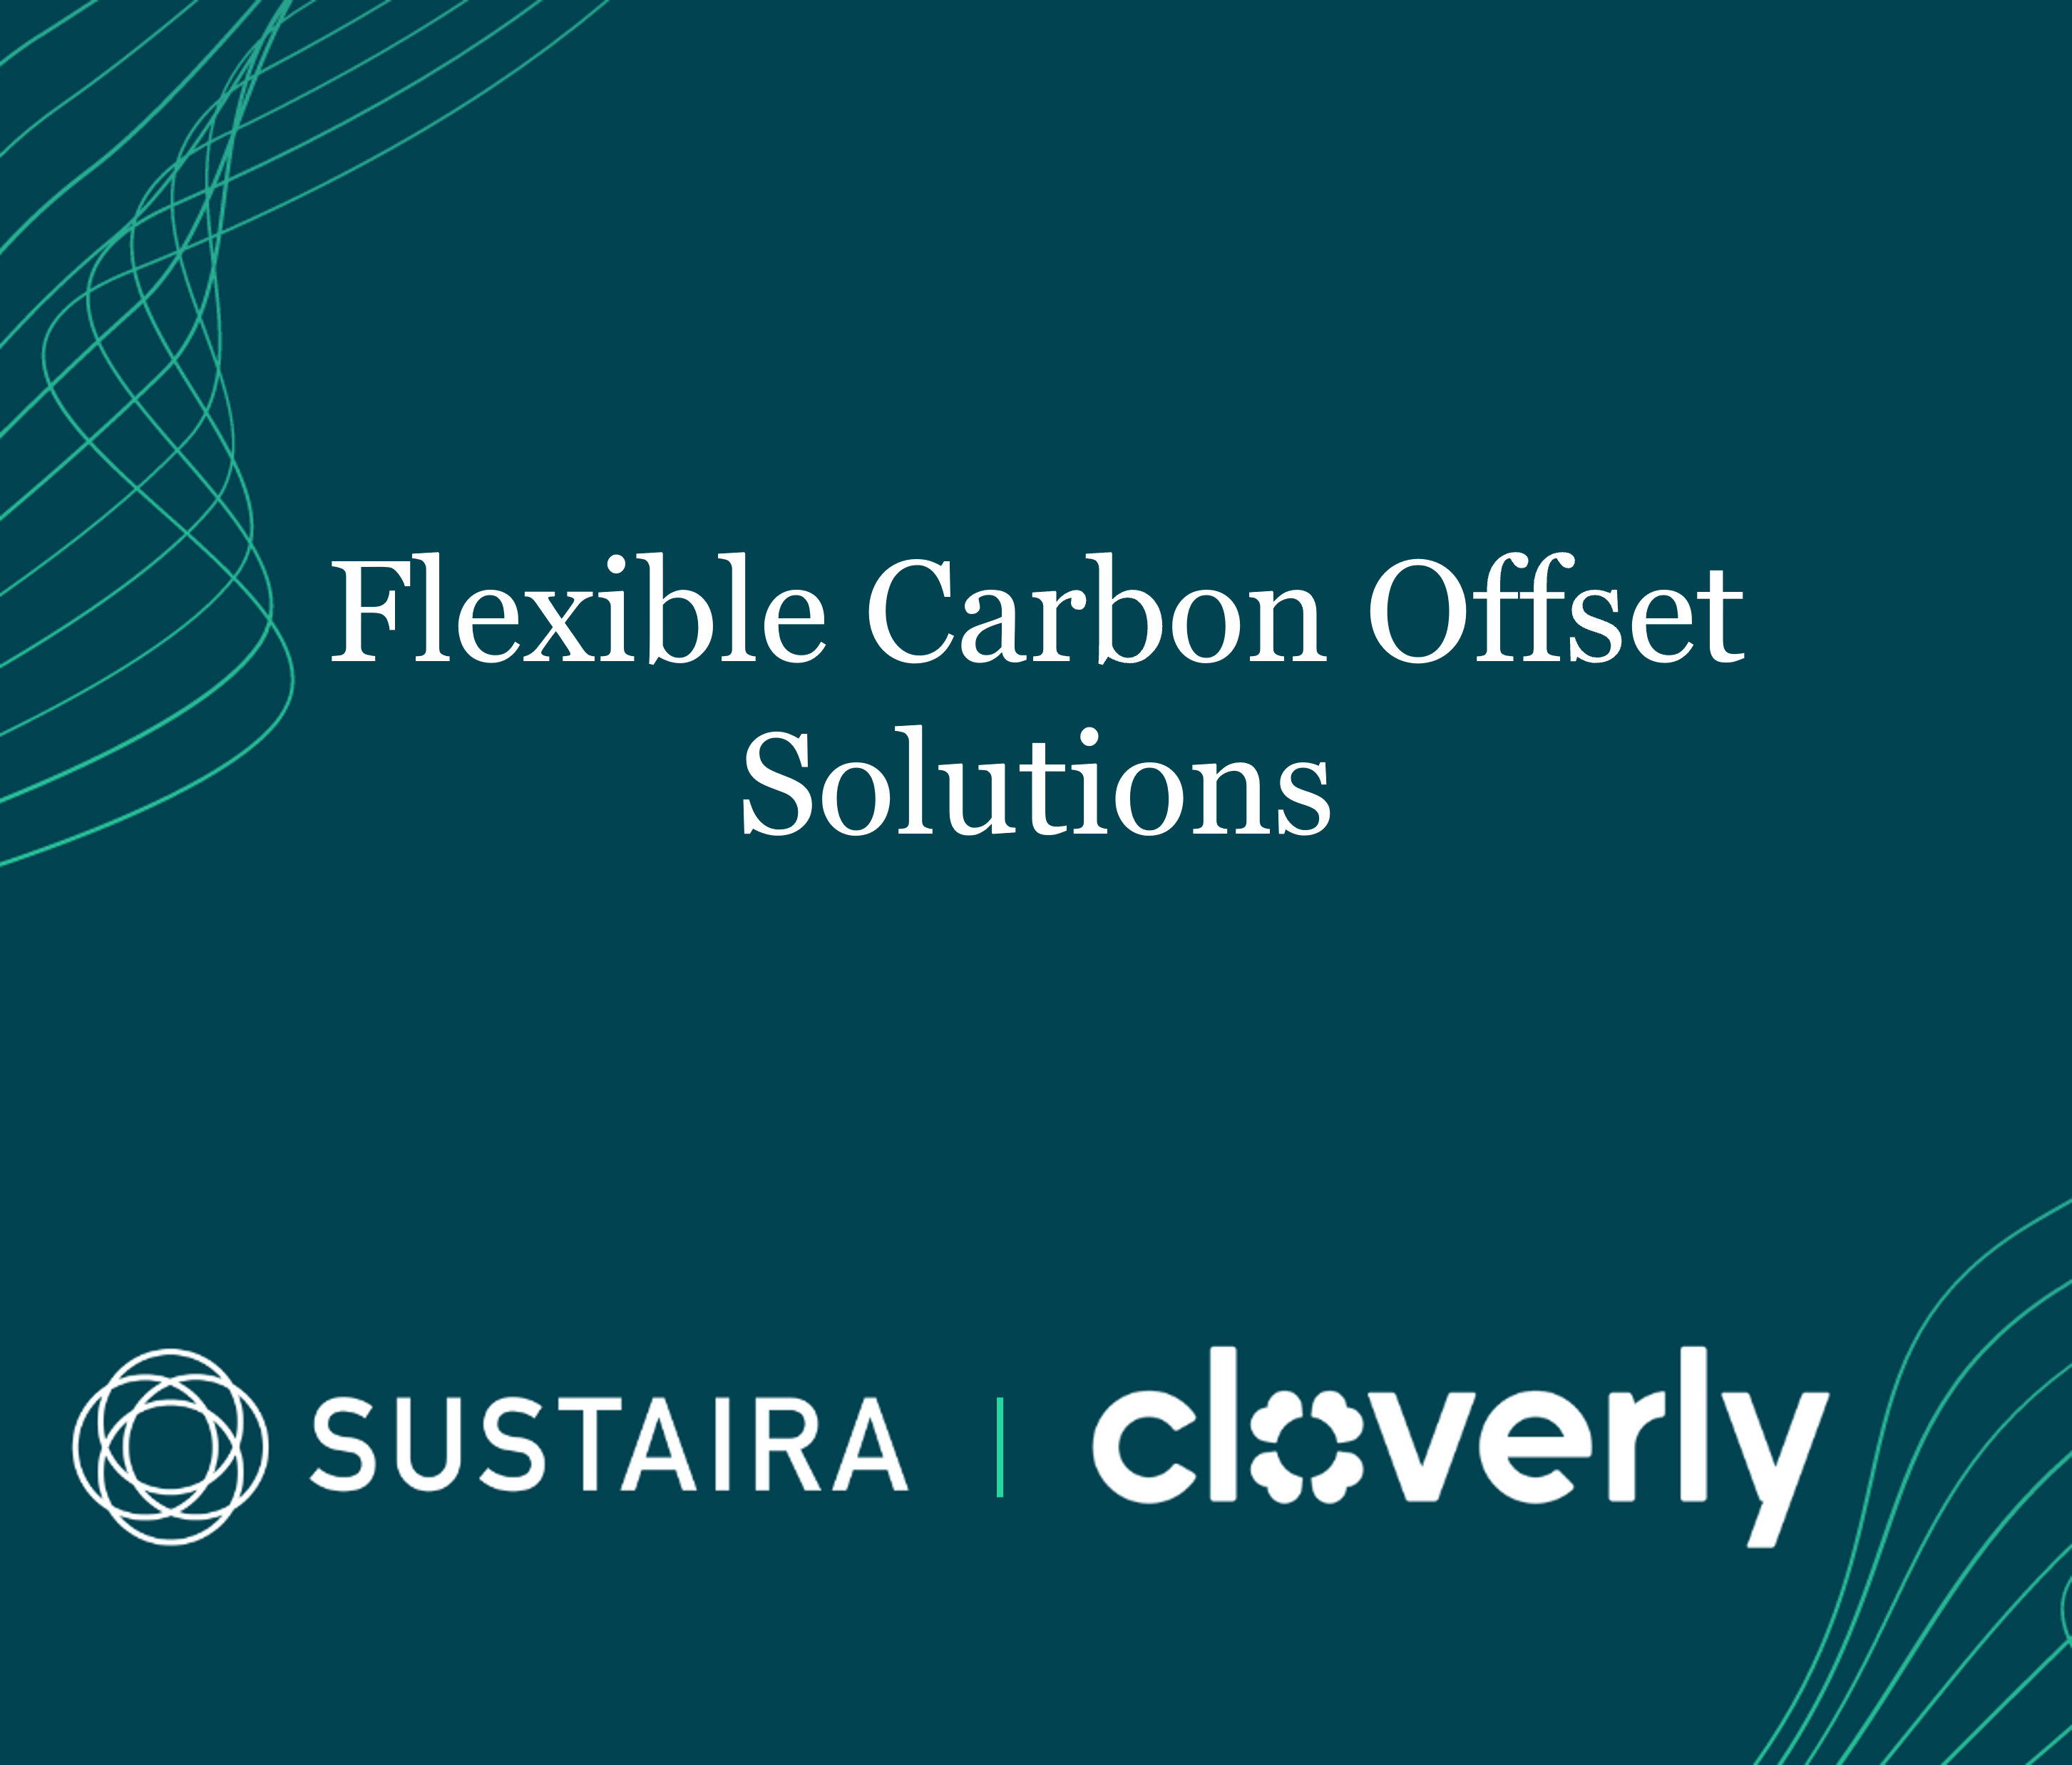 Flexible carbon offsetting solution launched by Sustaira and Cloverly